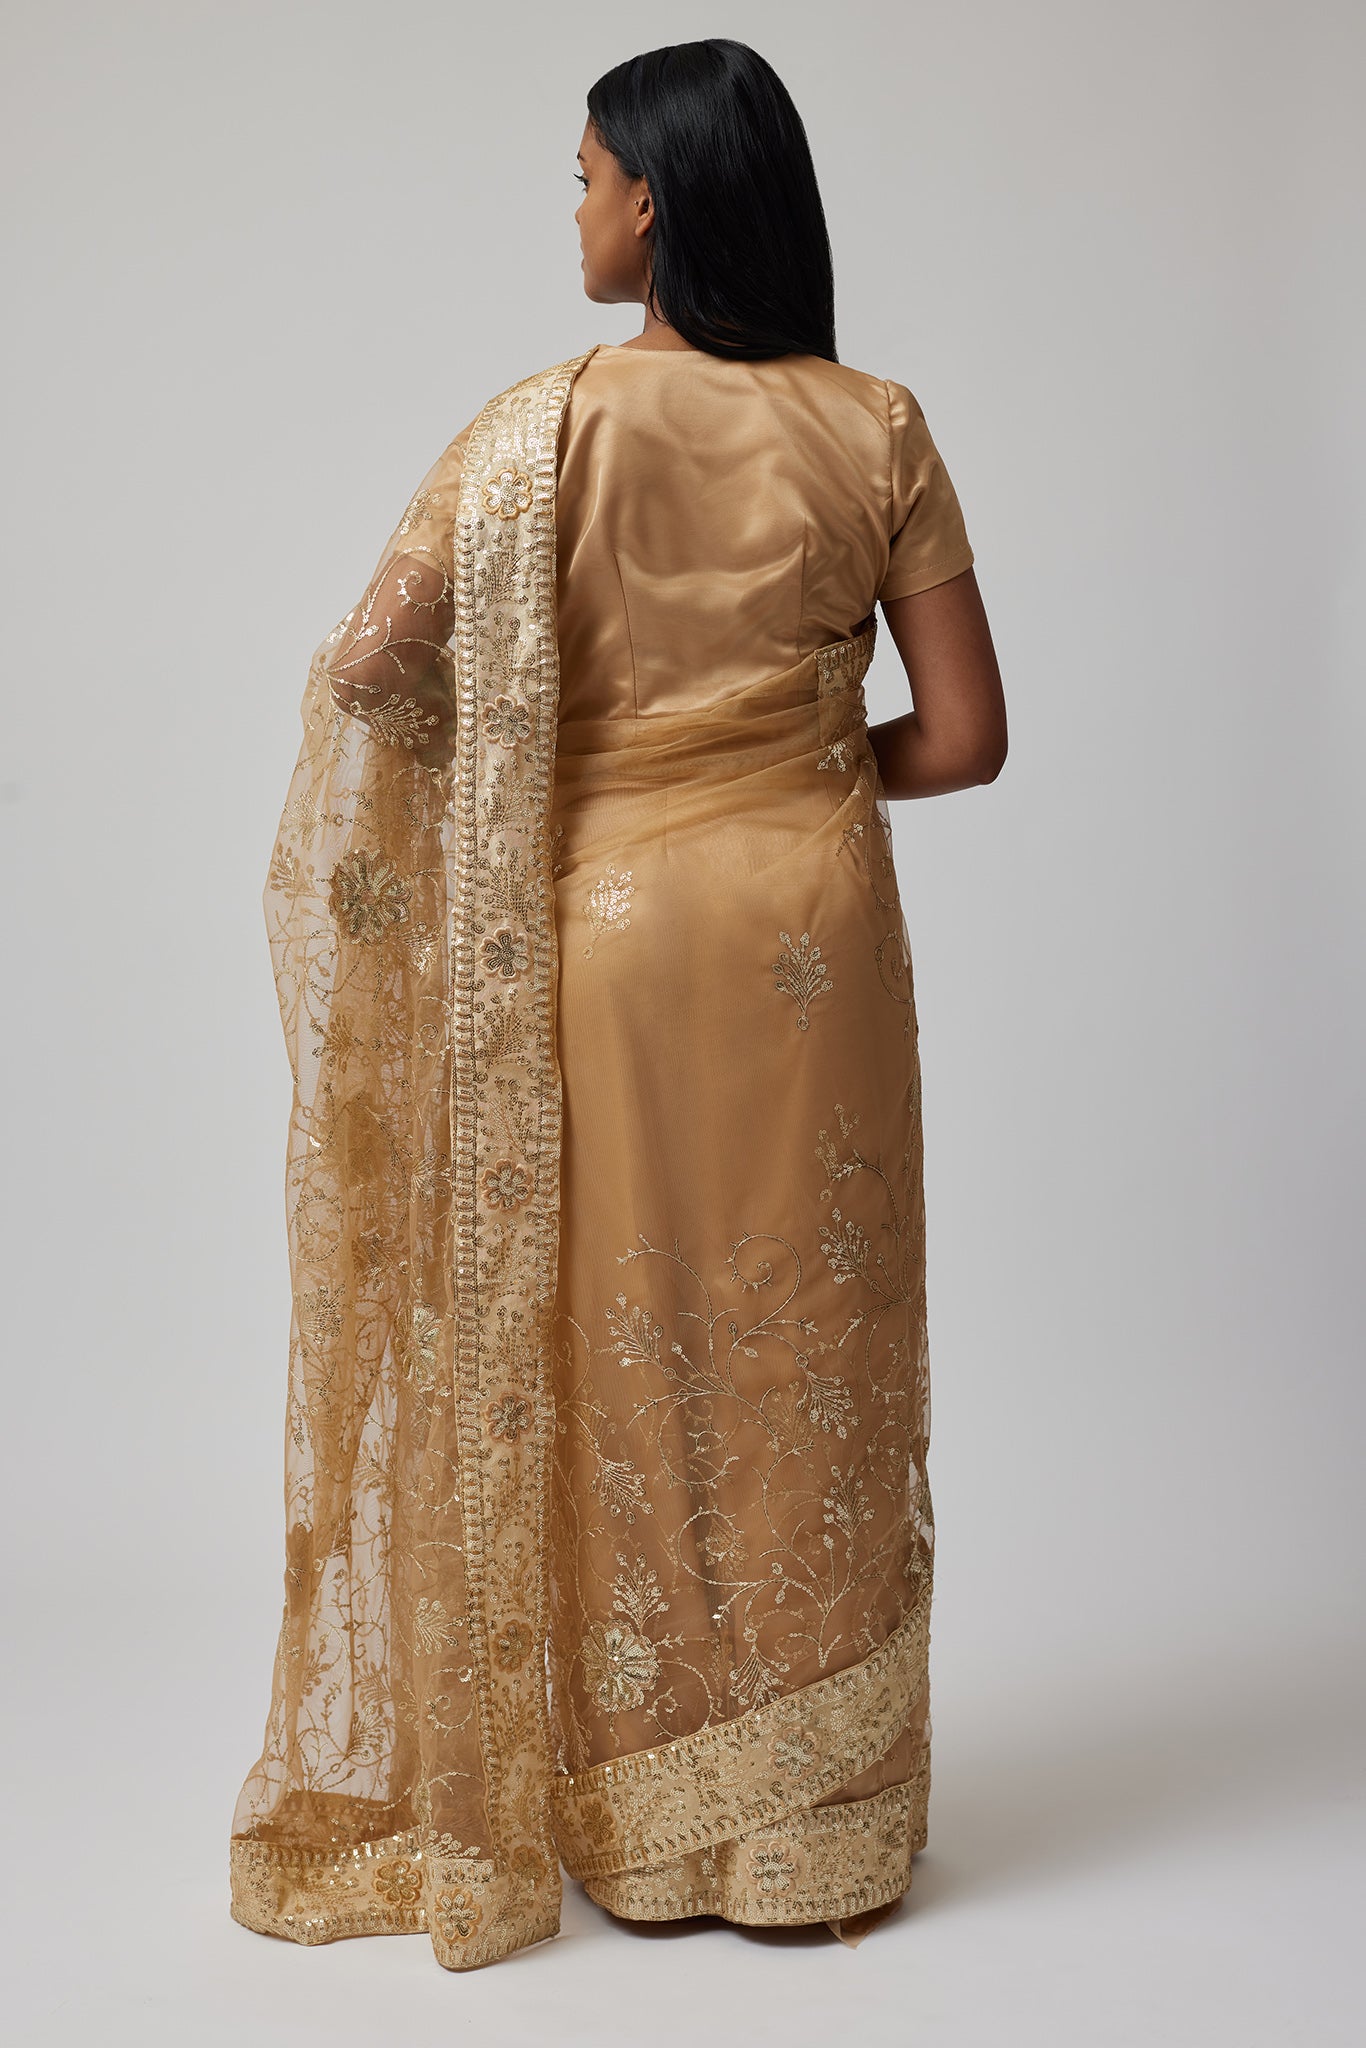 The Dimple Saree from the back